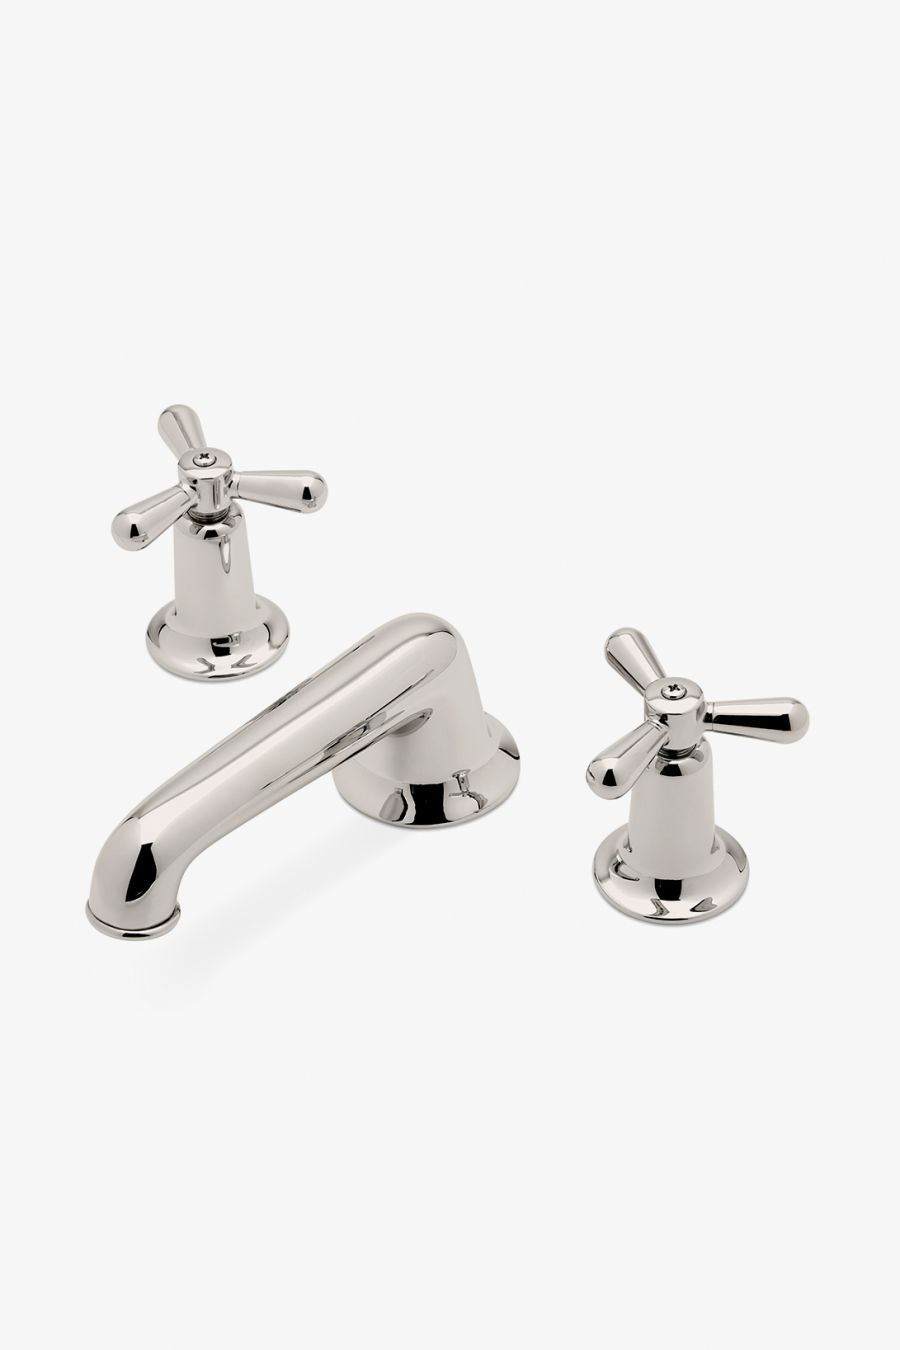 Cisal Double Handle Widespread Bathroom Faucet with Pop-Up Drain and Cross  Handle Finish: Polished Chrome 並行輸入品